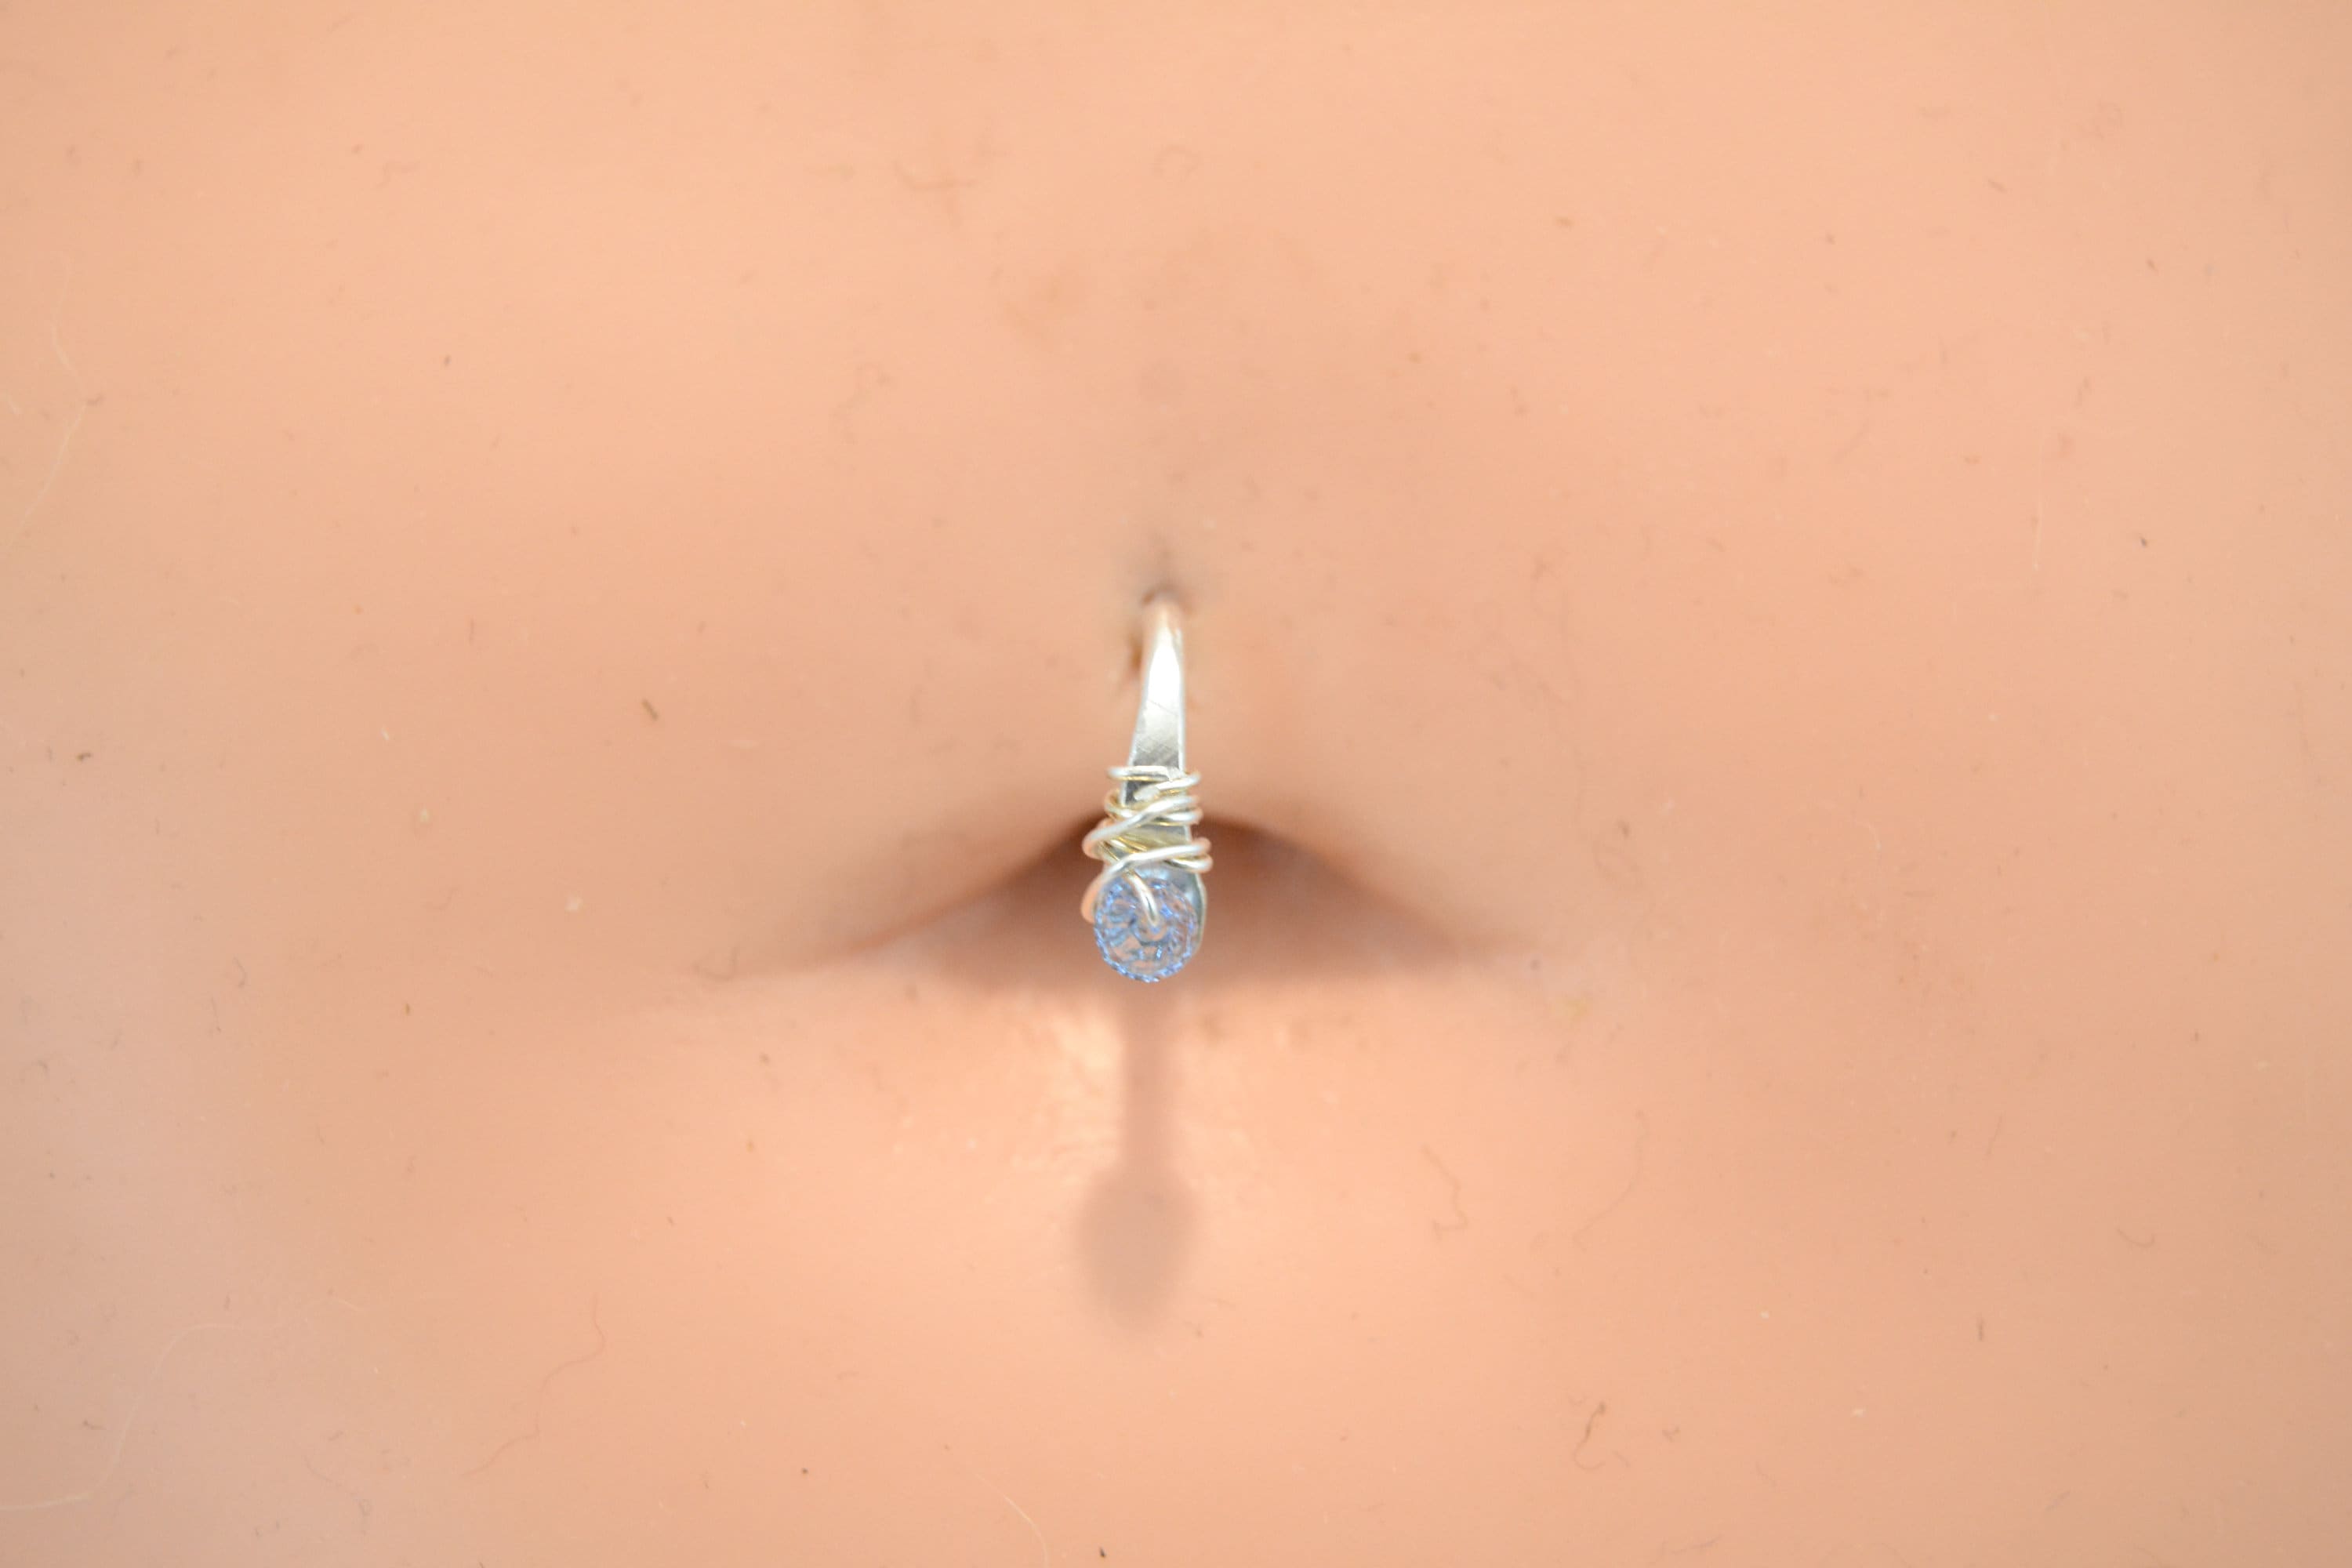 Tiny Belly Rings 14k Gold Filled - 20 Gauge Belly Button Piercing With  White Opal - Hypoallergenic Belly Jewelry 7mm-8mm - Handmade Body Jewelry  for